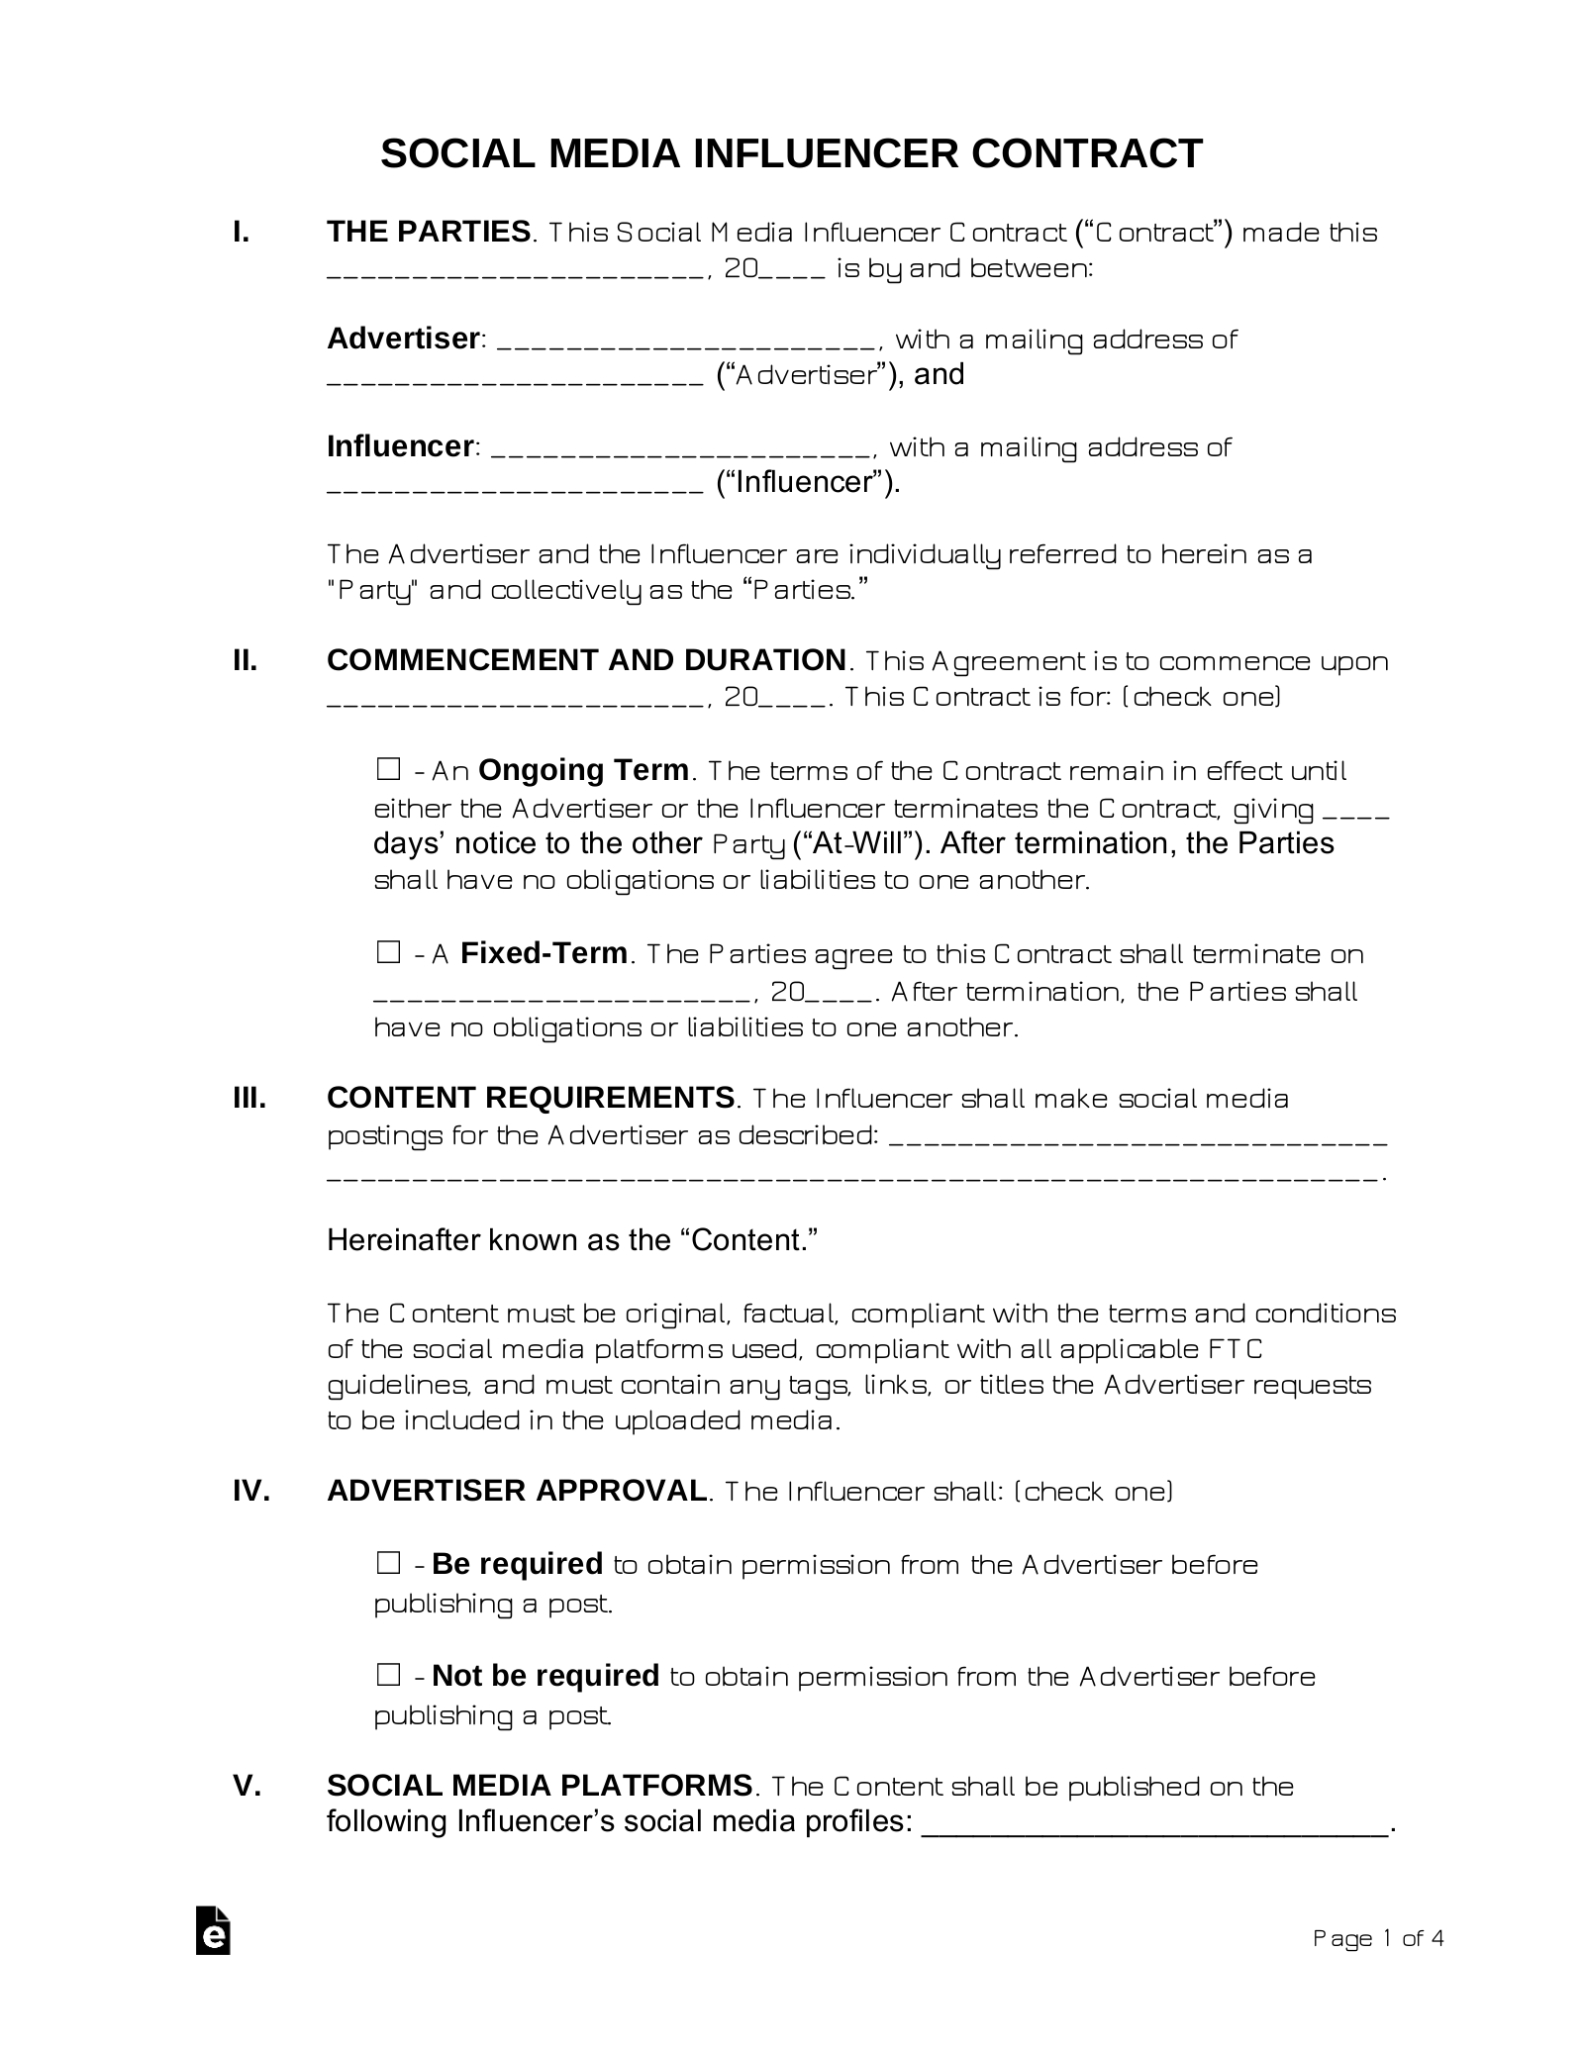 Free Social Media Influencer Contract Template | Sample - Word | Pdf With Regard To Brand Partnership Agreement Template